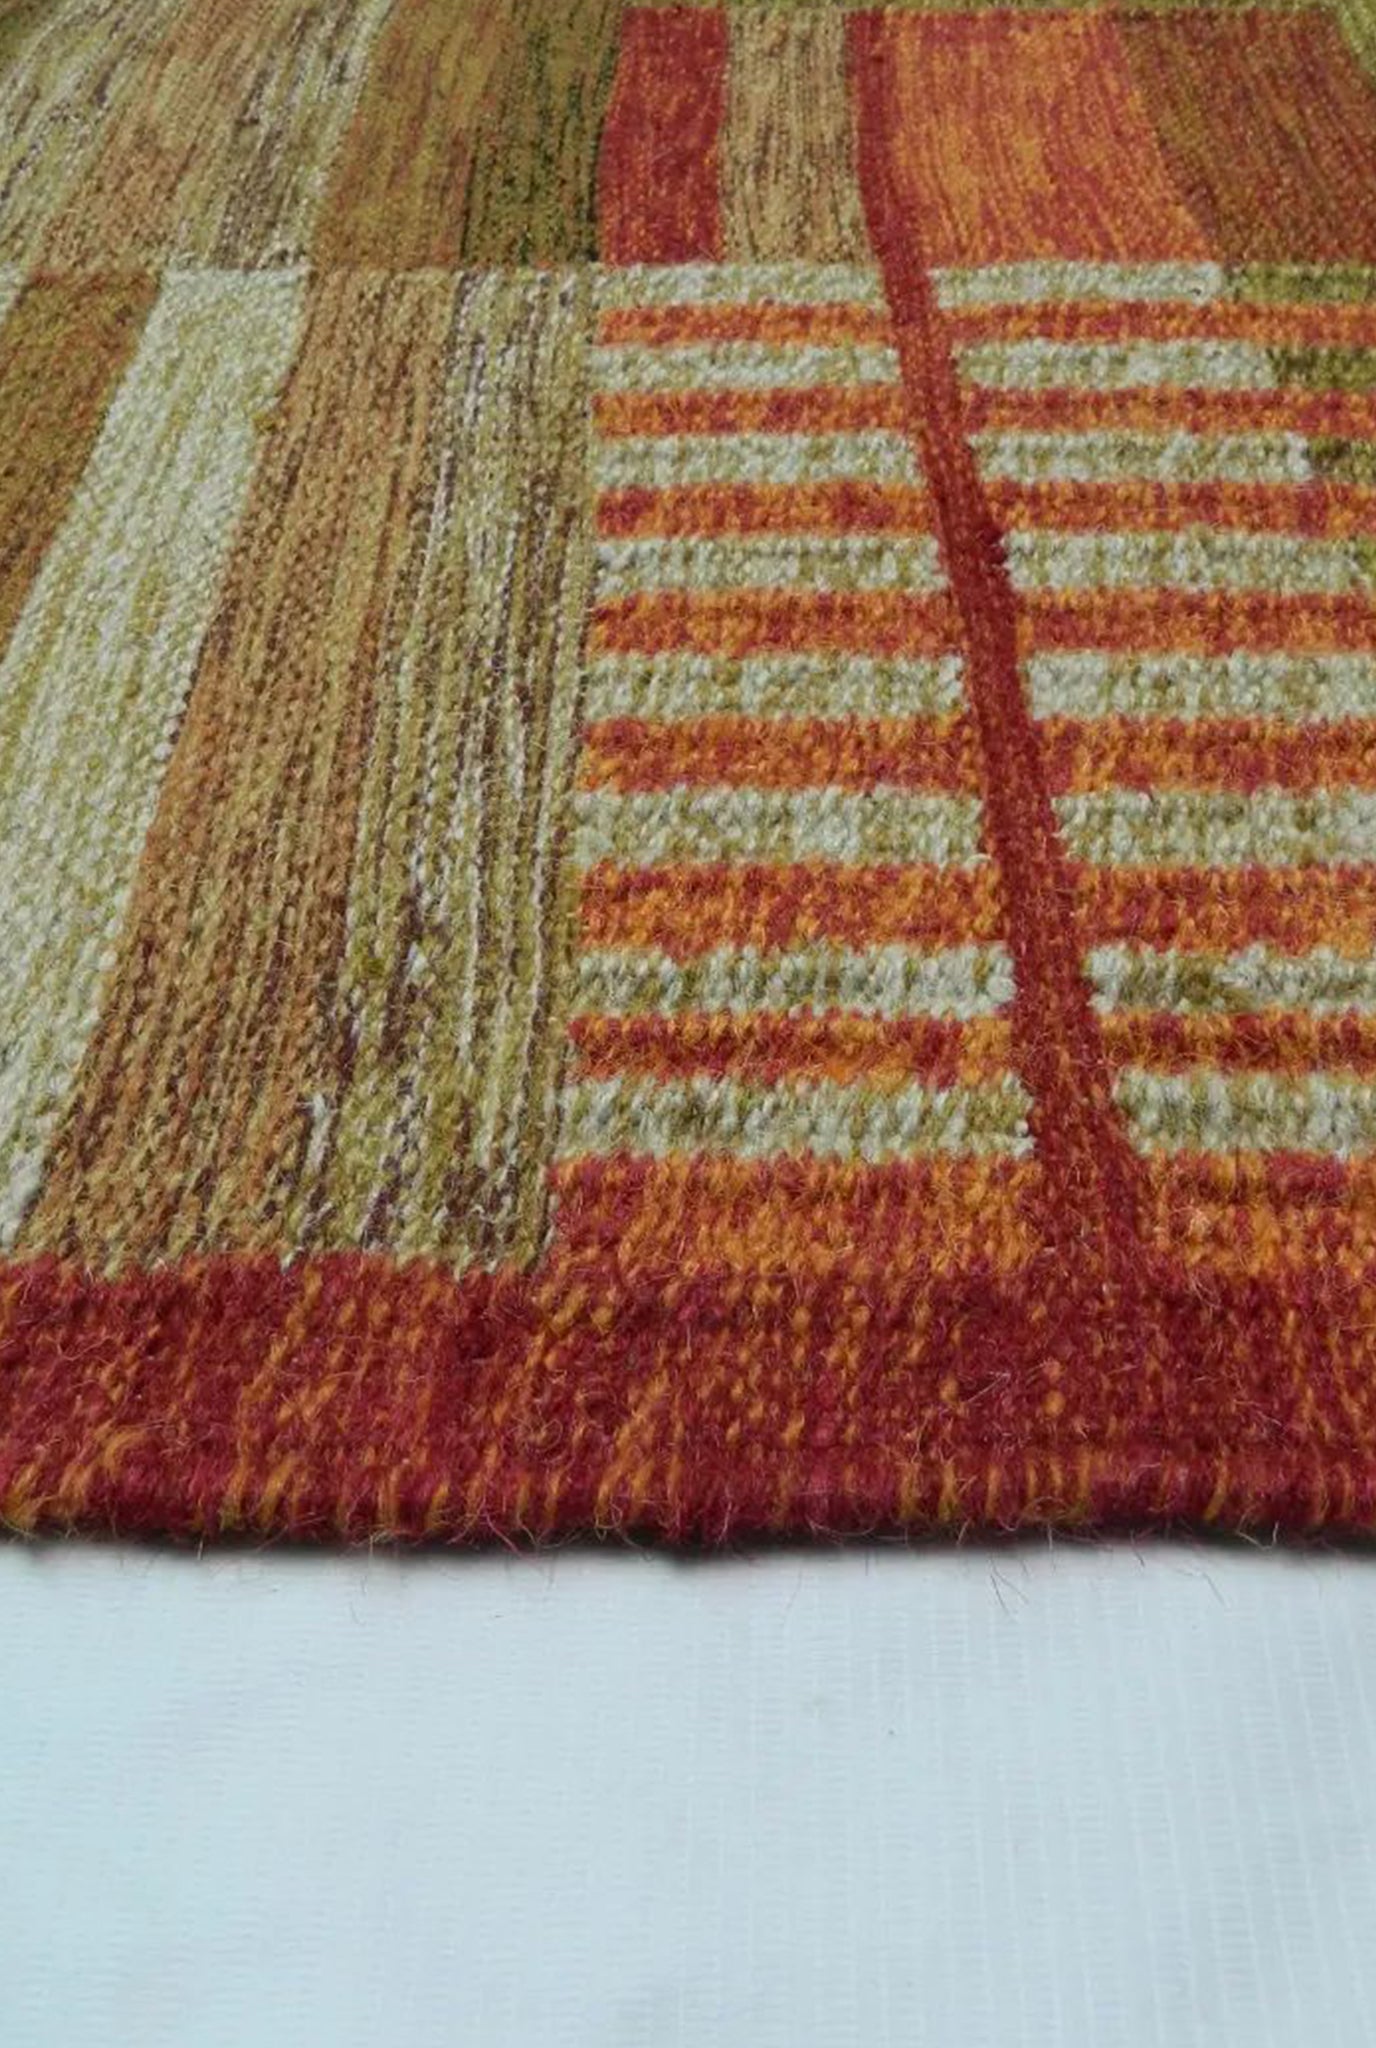 handcrafted-woven-rug-carpet-cotton-wool-home decor- jodi